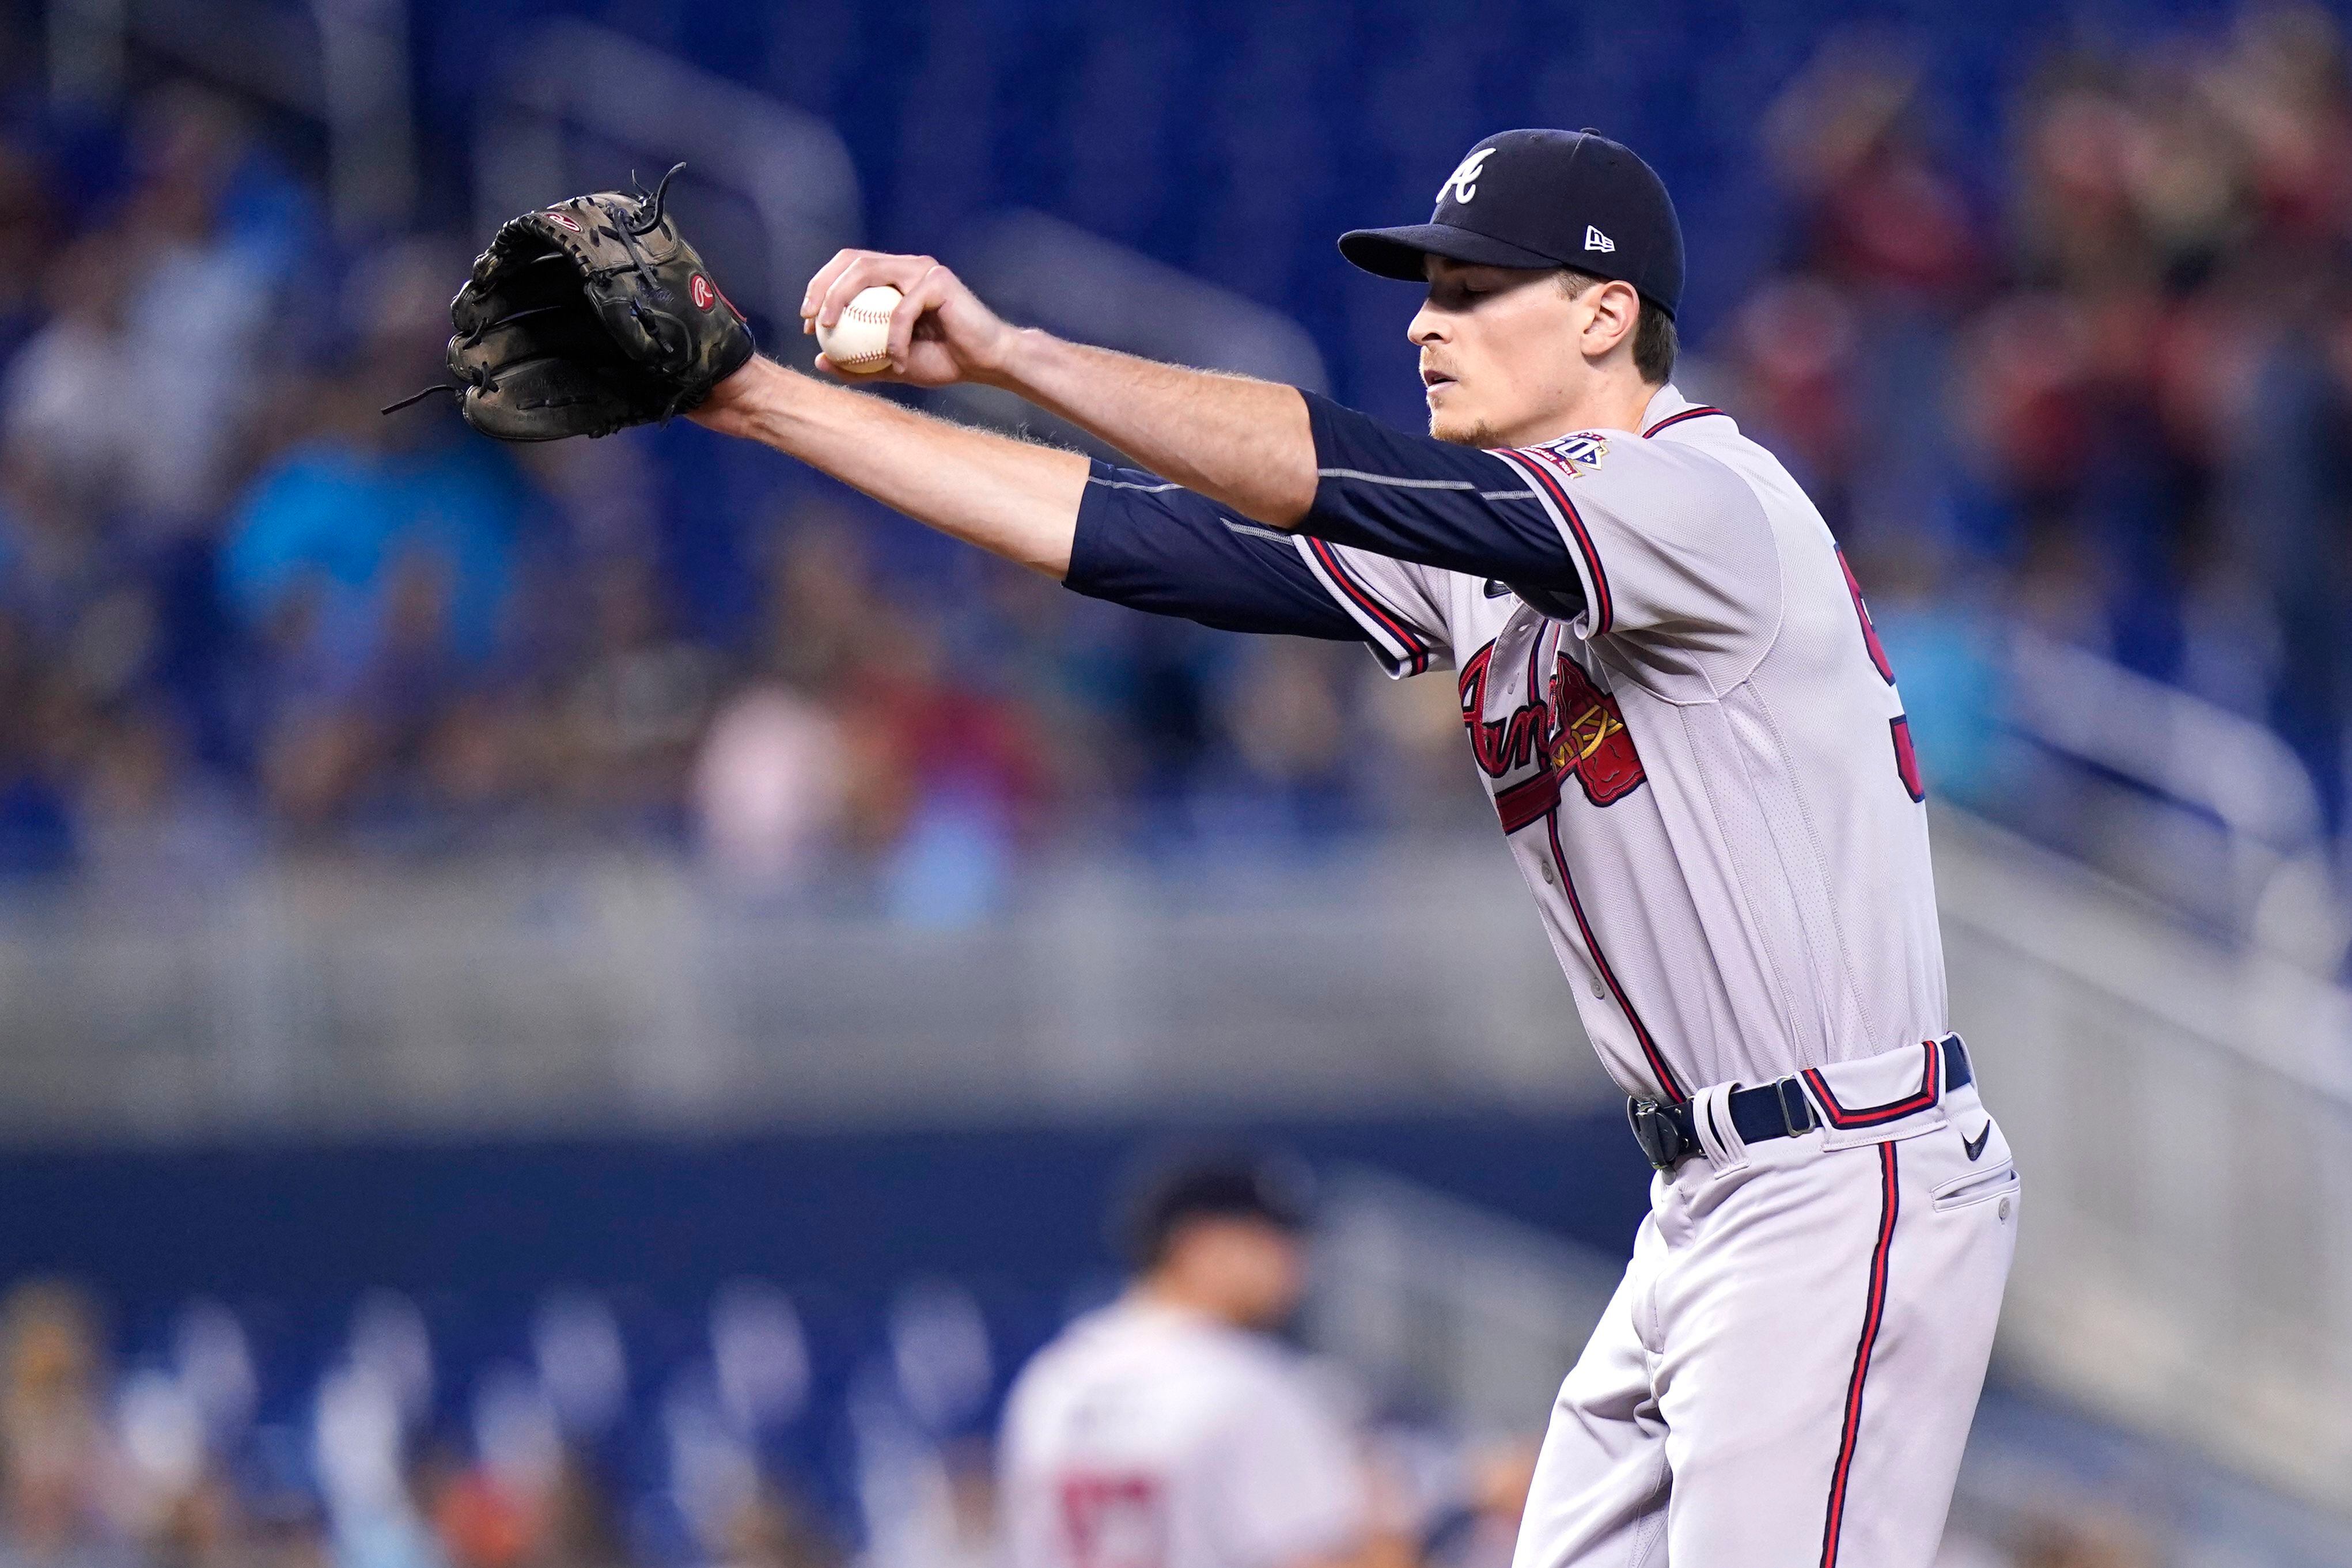 Atlanta Braves - A three game series vs. the Marlins starts tonight in  Miami. #ForTheA